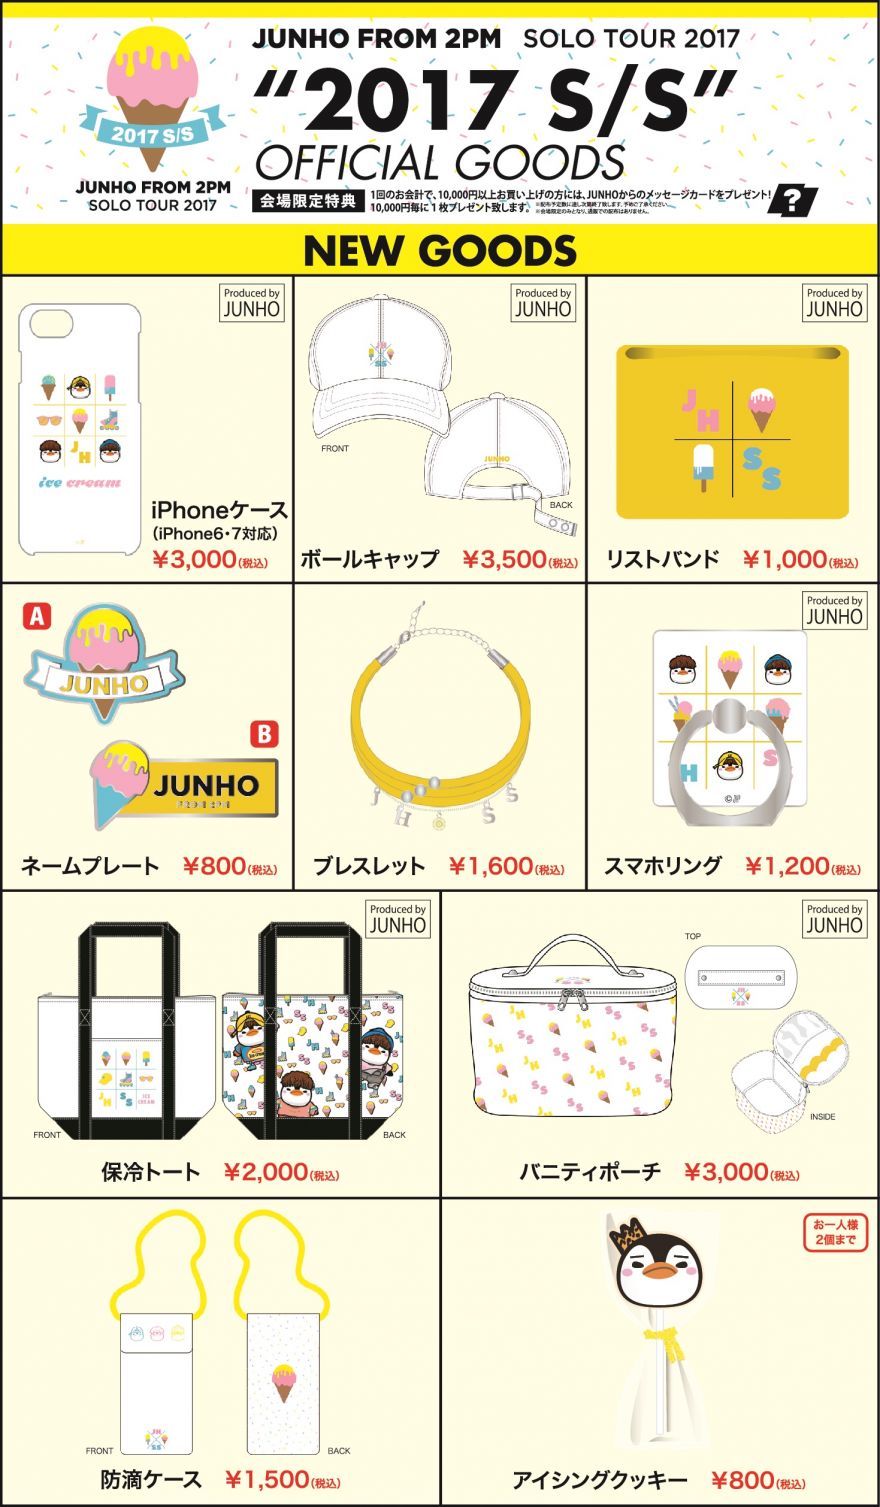 JUNHO (From 2PM) Solo Tour 2017 “2017 S/S” 追加グッズの販売が決定 